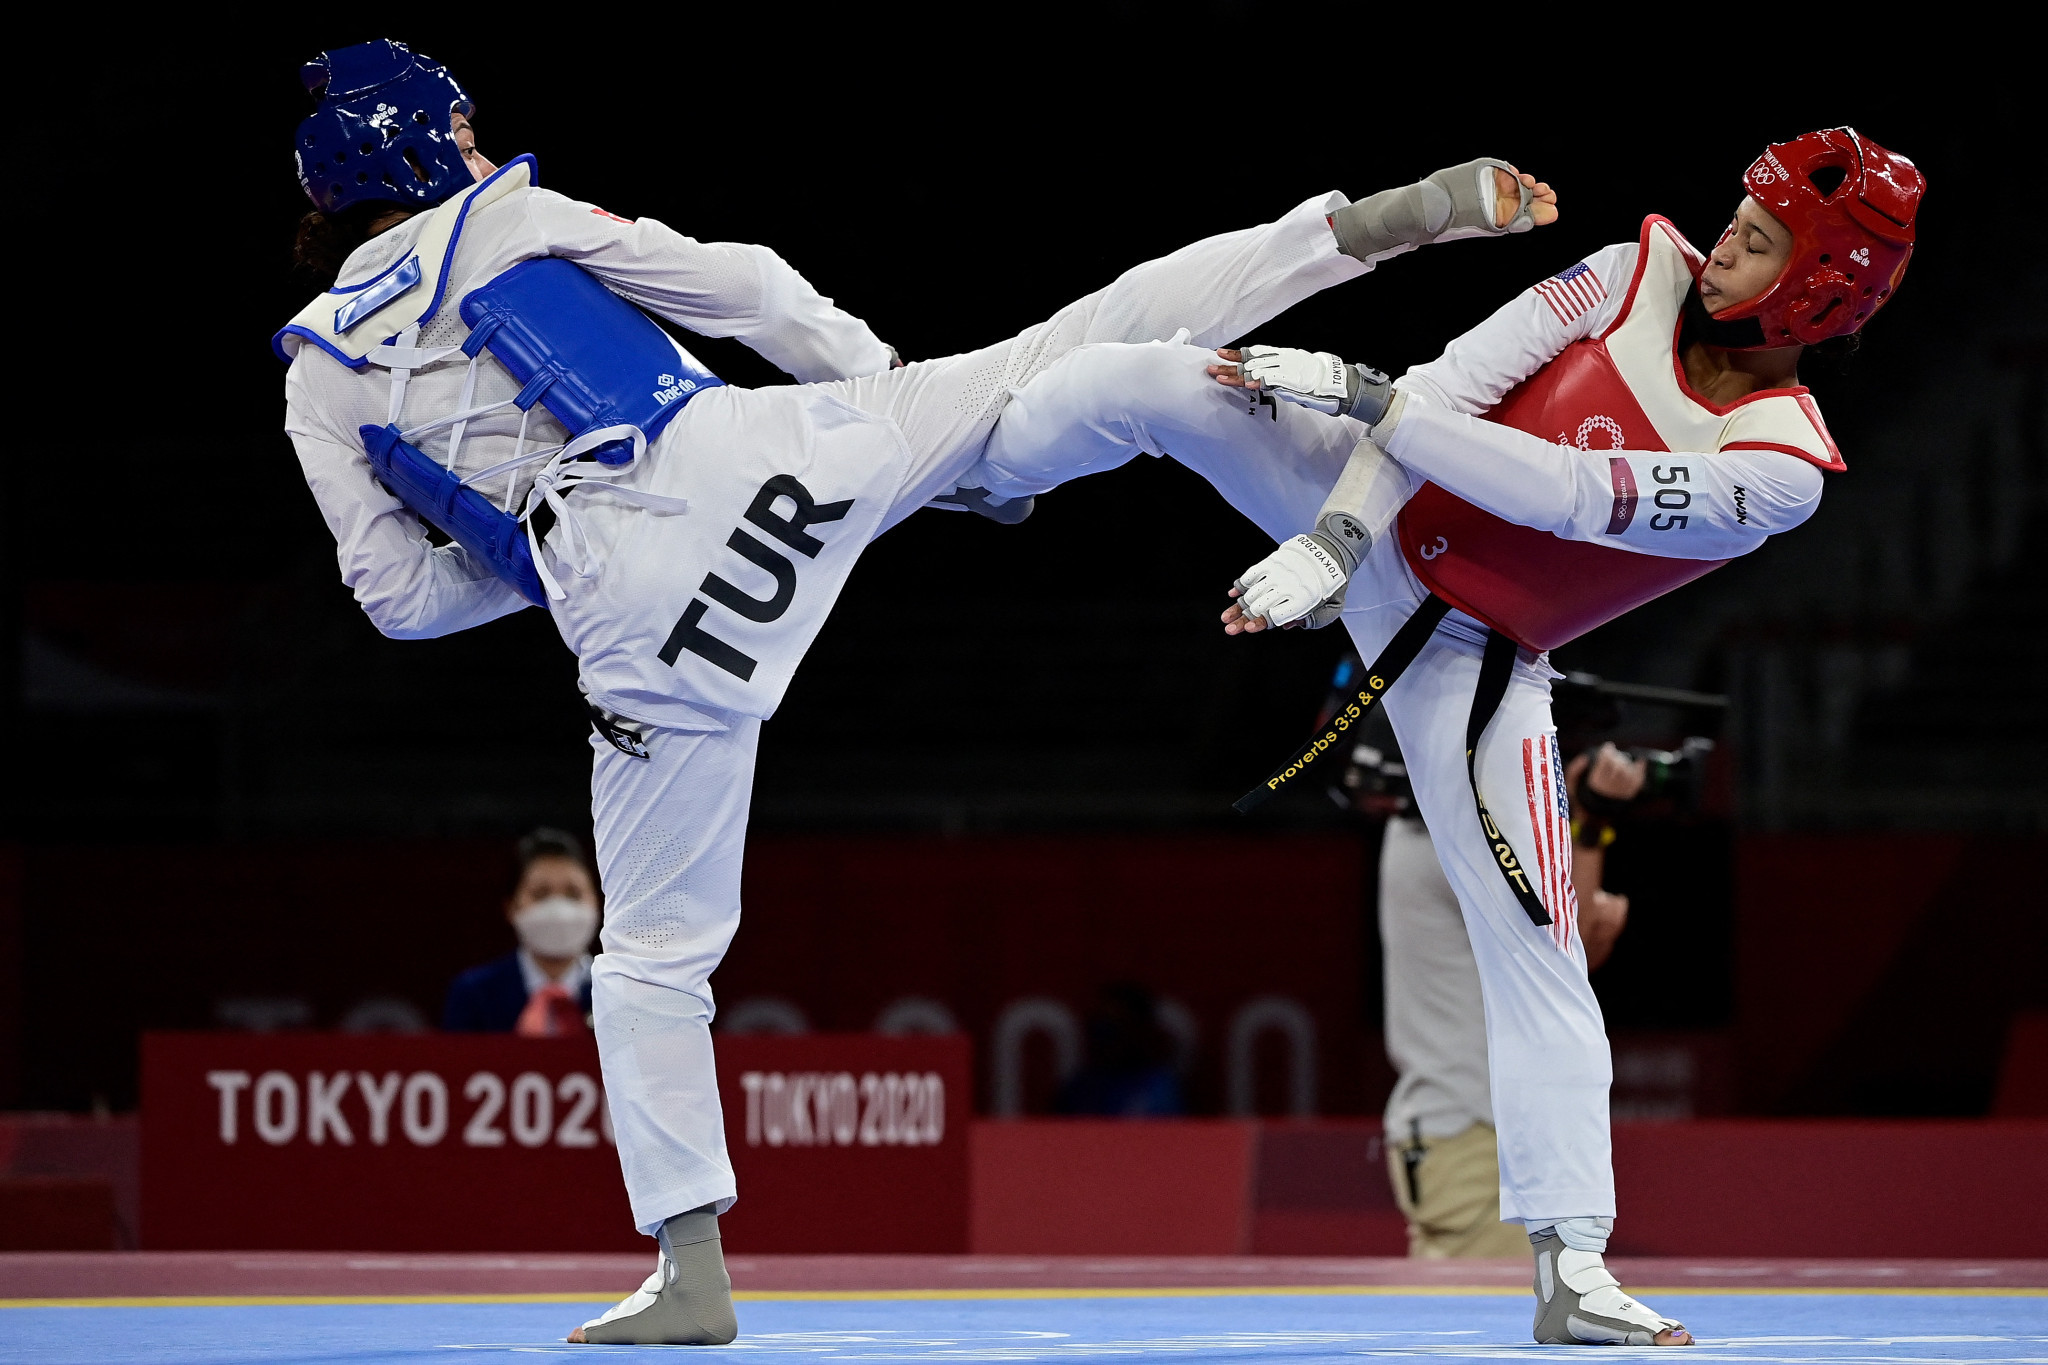 Turkey has regularly won taekwondo medals at major competitions ©Getty Images